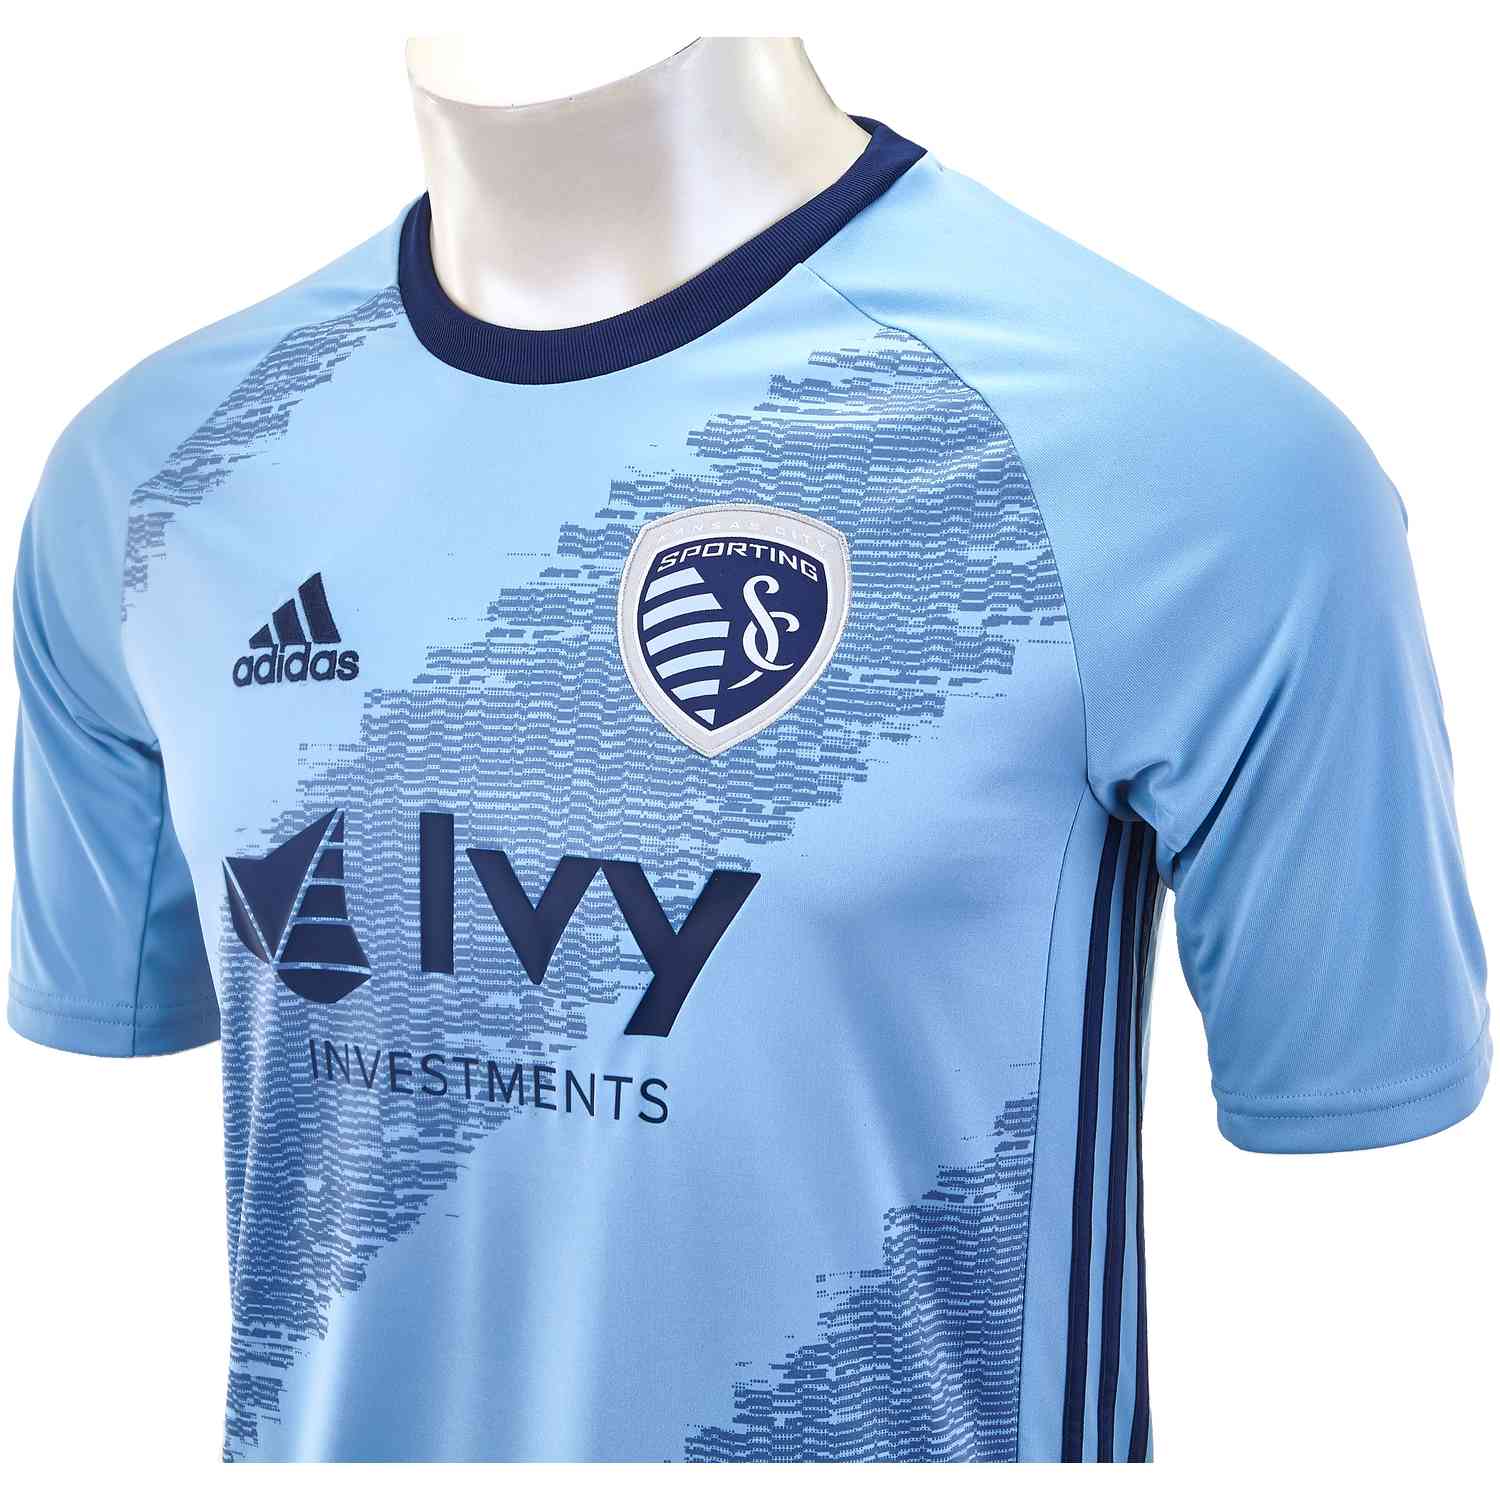 new sporting kc jersey